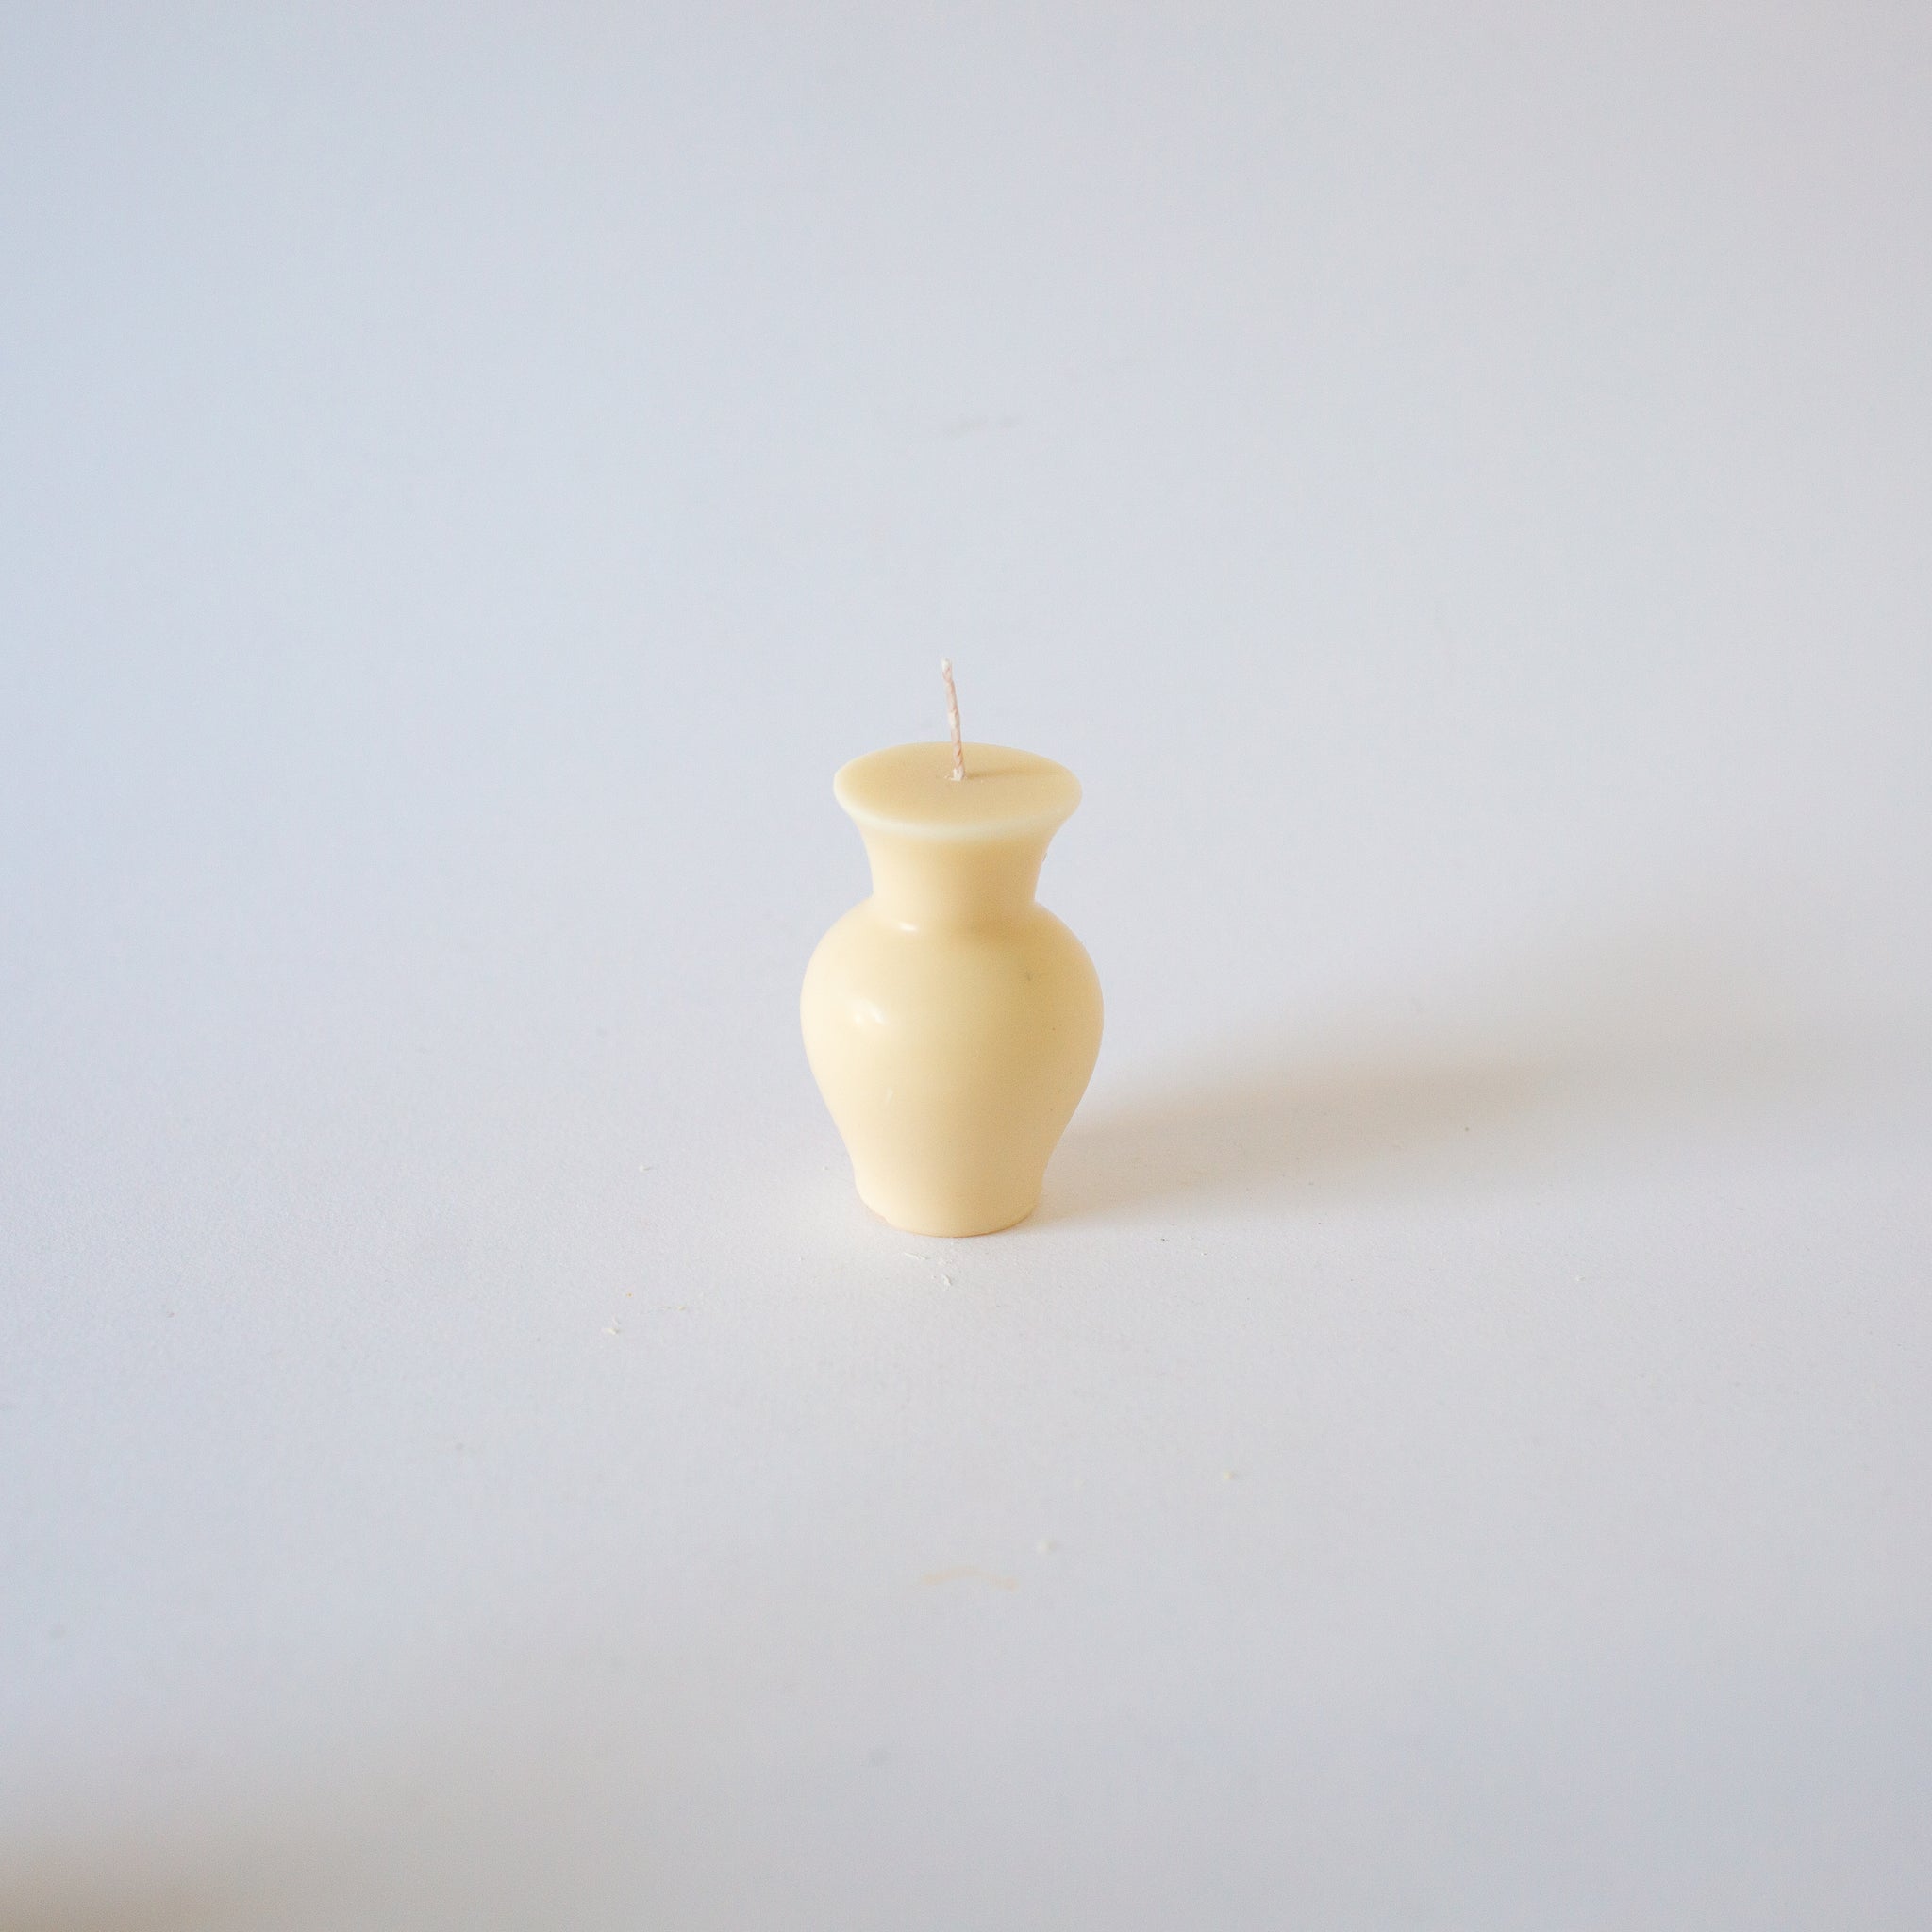 Nata Concept Iris soy Candle in Cream. Available at EASE Toronto. 